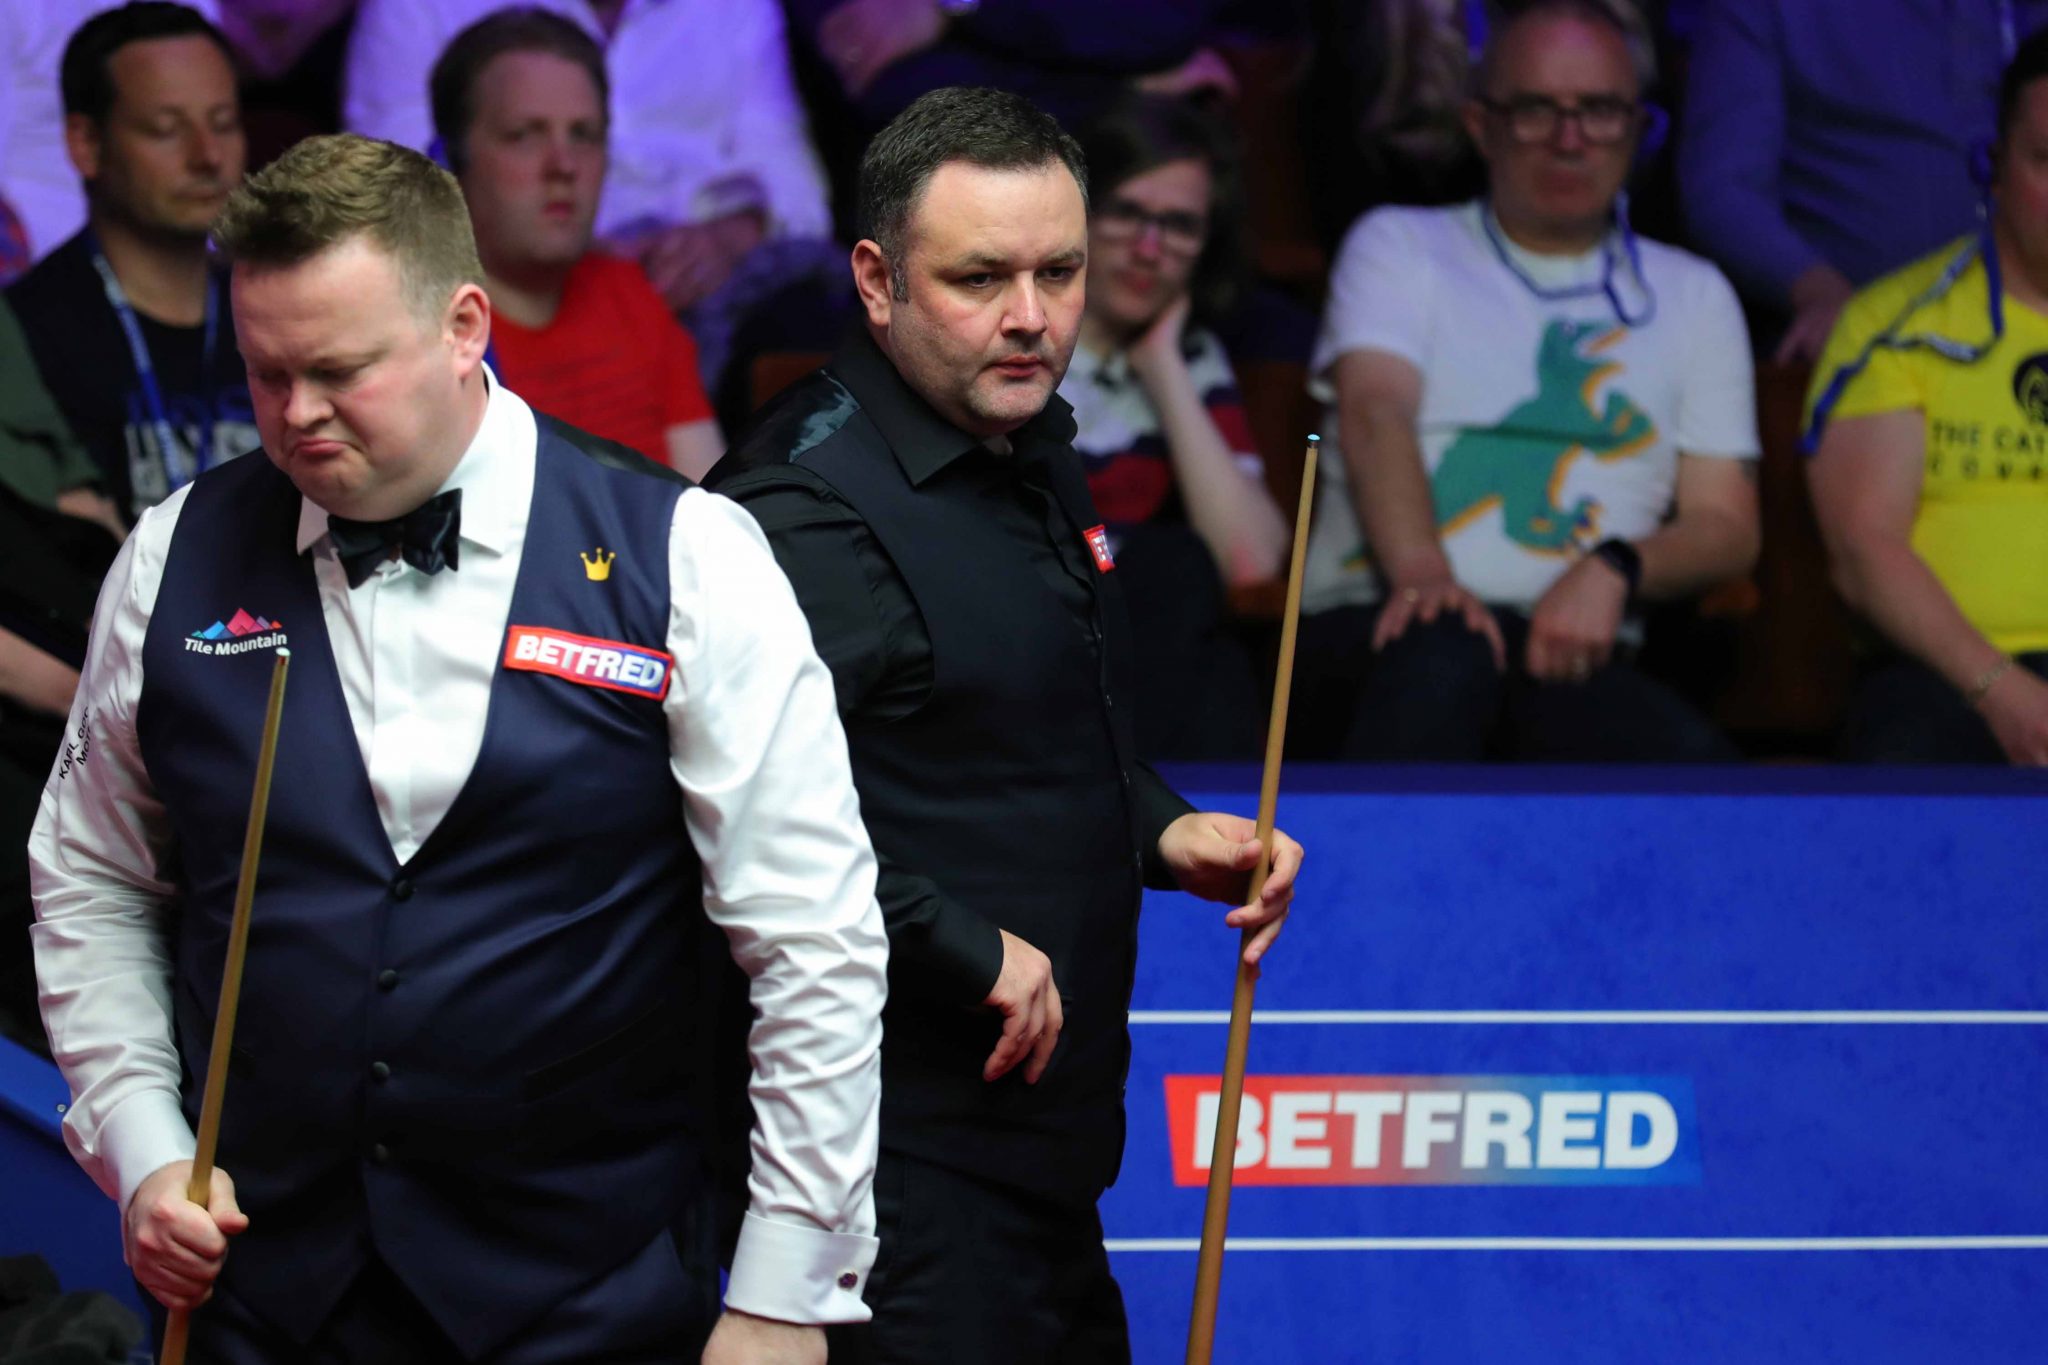 MAGUIRE DOWNS MURPHY IN FIRST CRUCIBLE MEETING